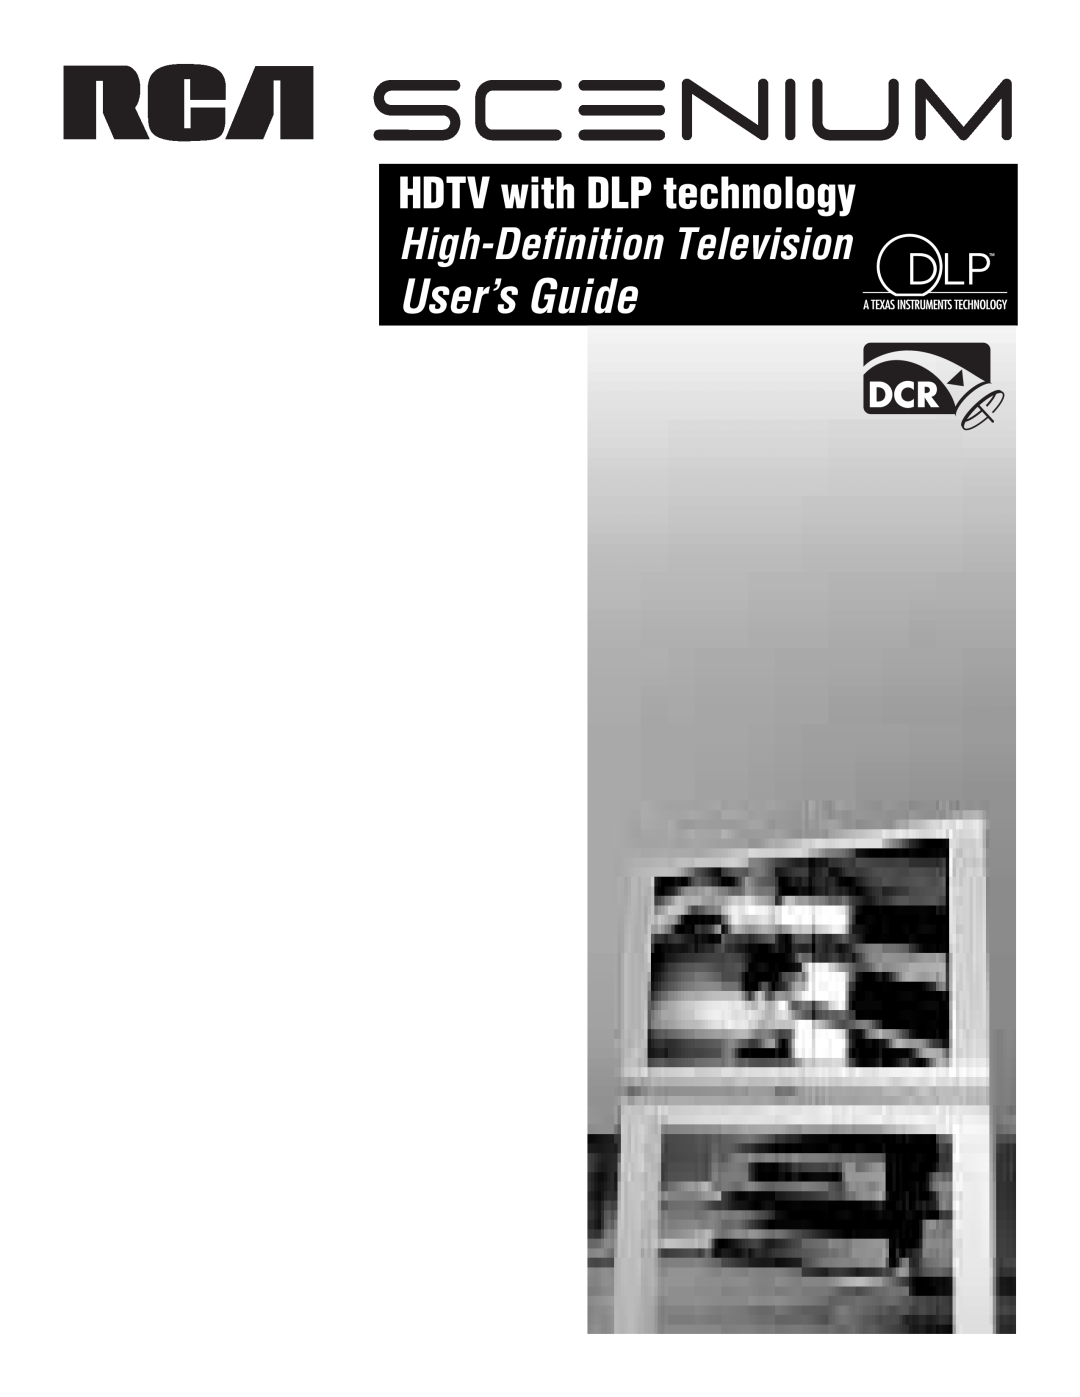 RCA scenium manual User’s Guide, HDTV with DLP technology, High-Definition Television 